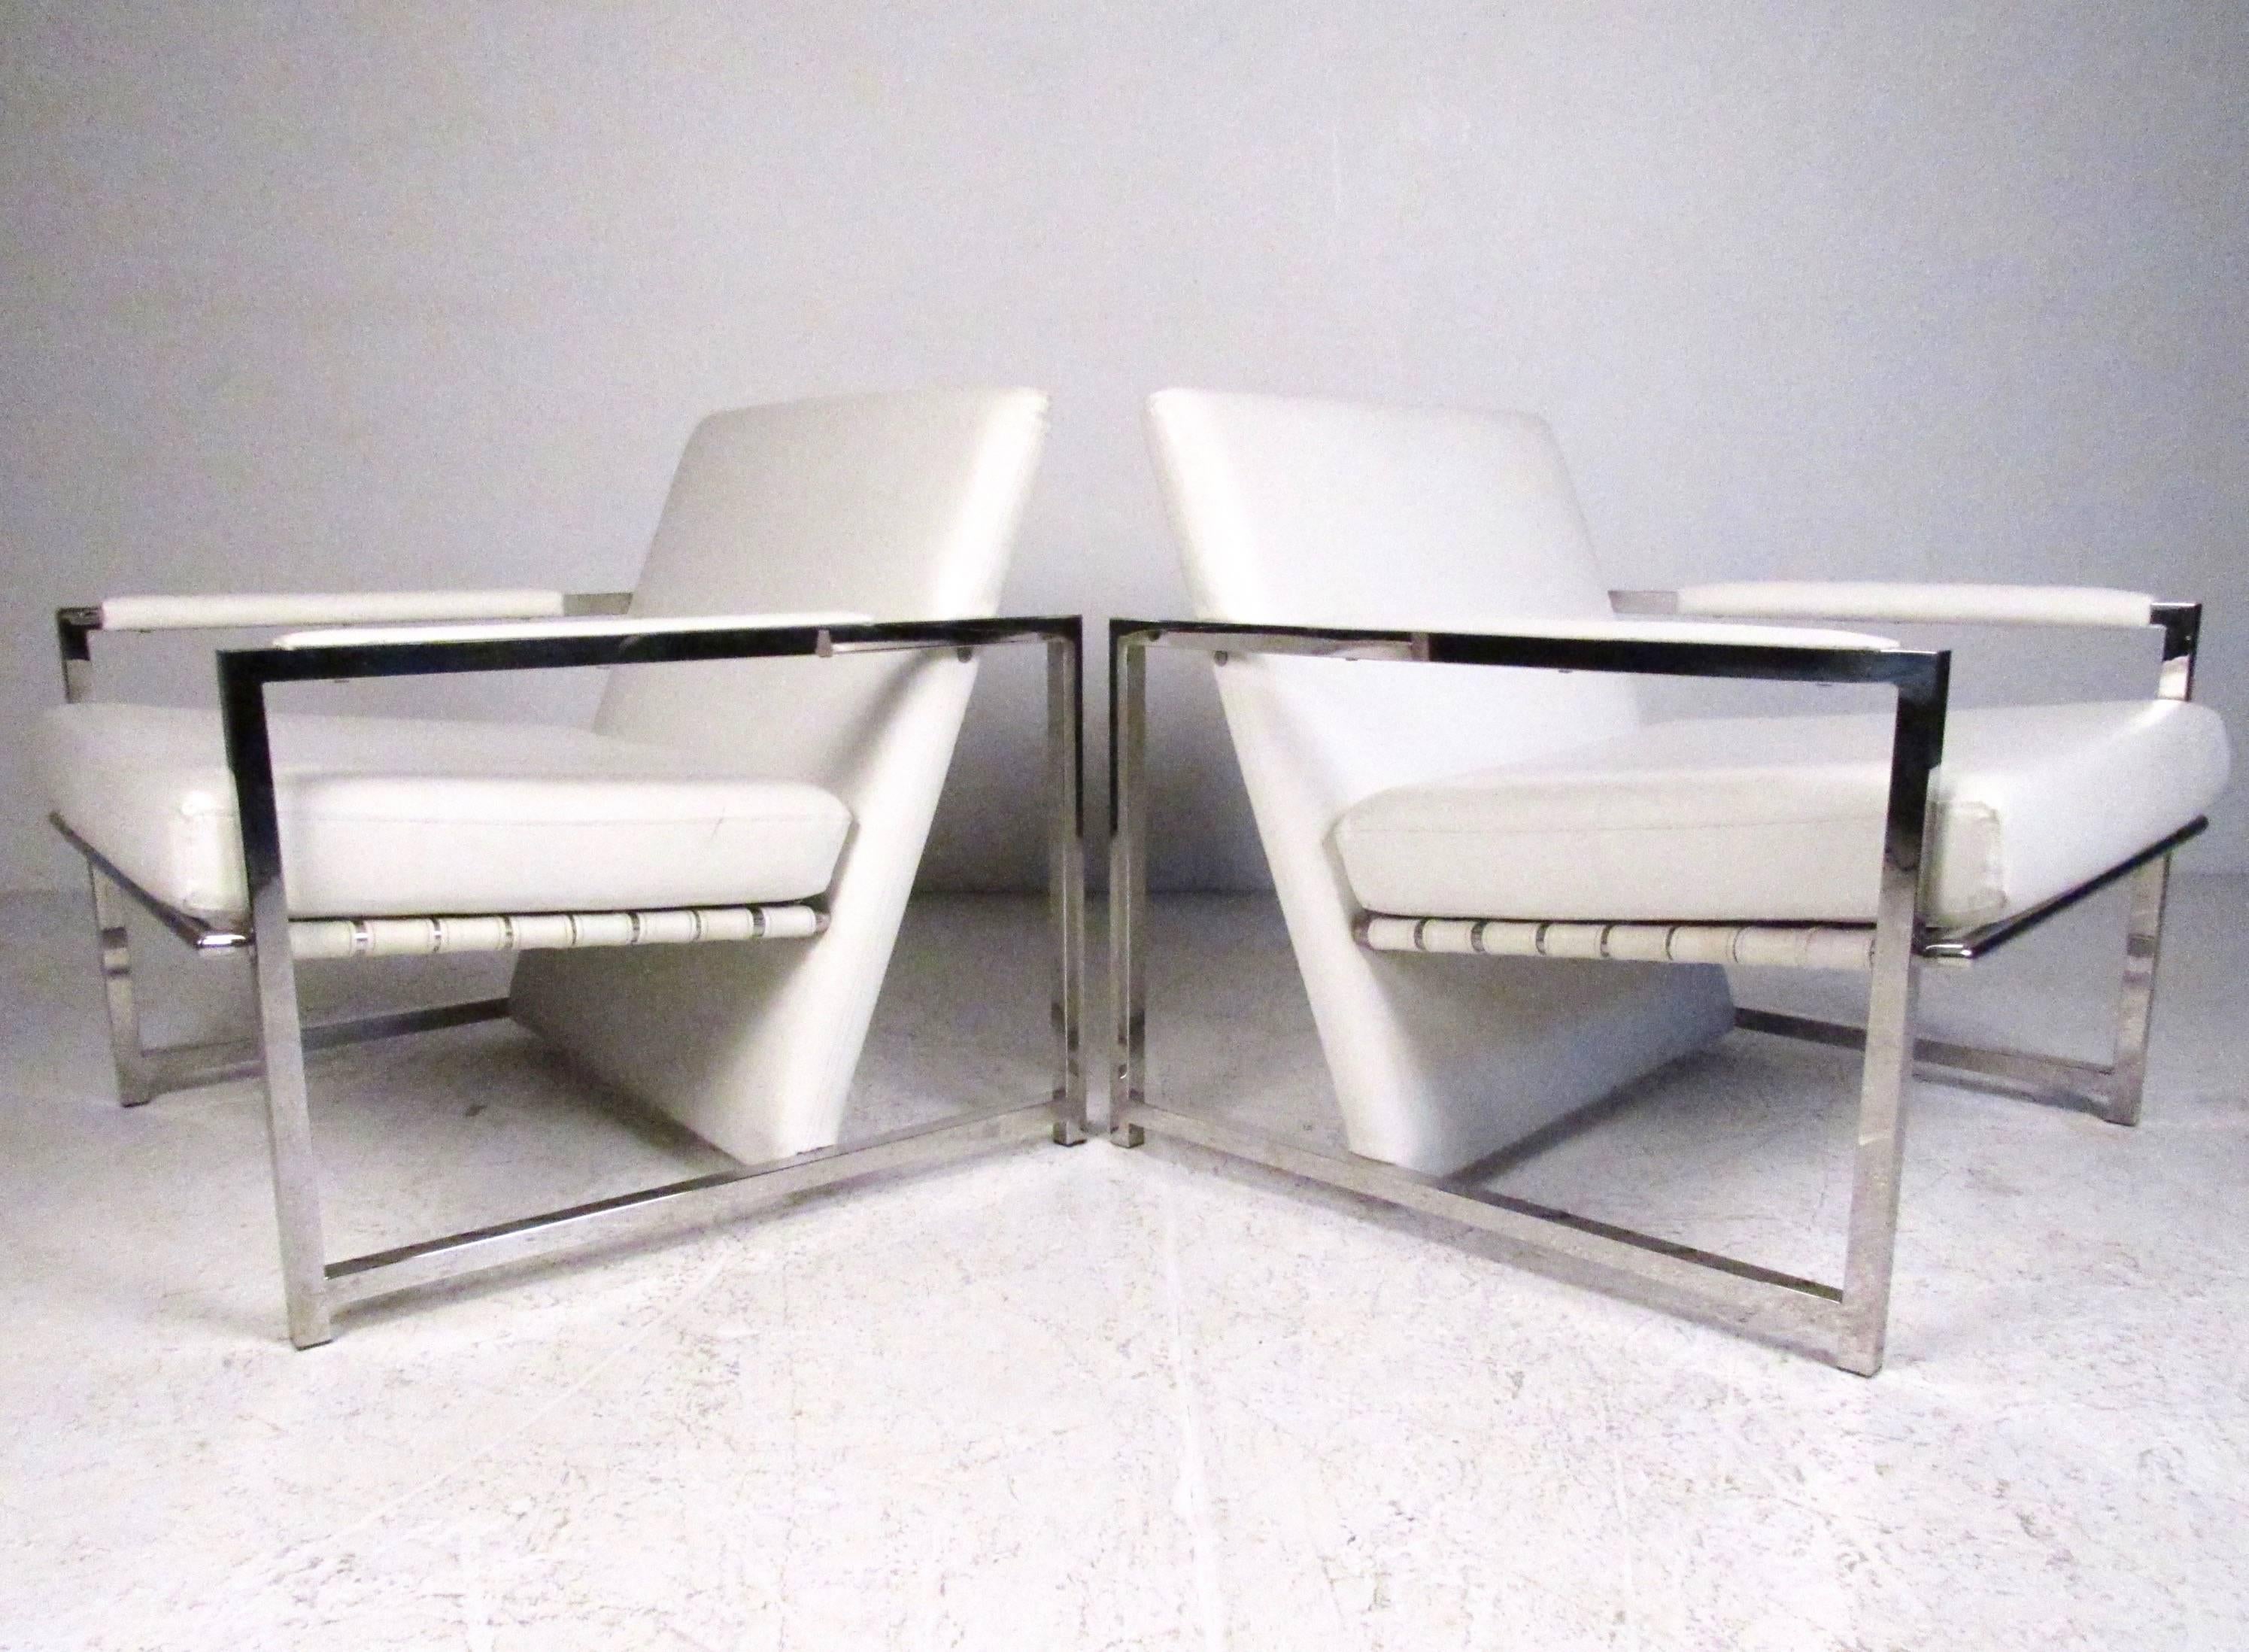 This unique pair of chrome and vinyl club chairs feature unique Mid-Century Modern style and comfortable proportions. Stylish angled seat backs, comfortable upholstery, and padded heavy chrome frames add to the modern appeal of these lounge chairs.